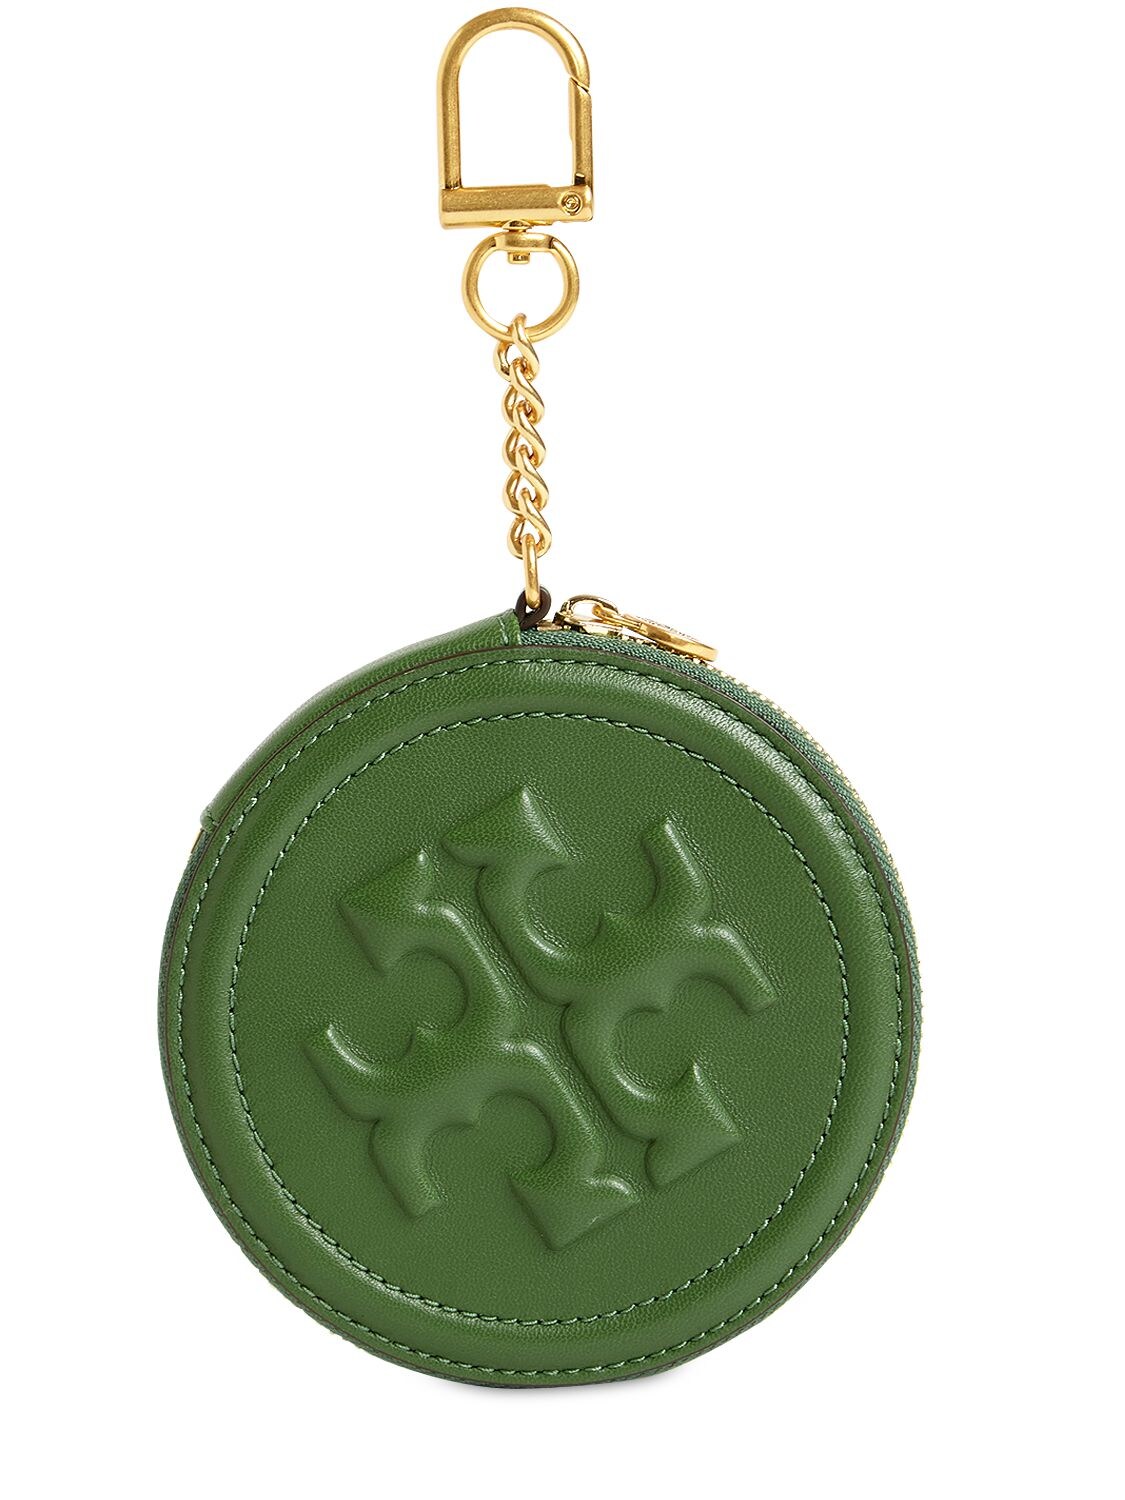 Tory Burch Flaming Leather Coin Purse In Green